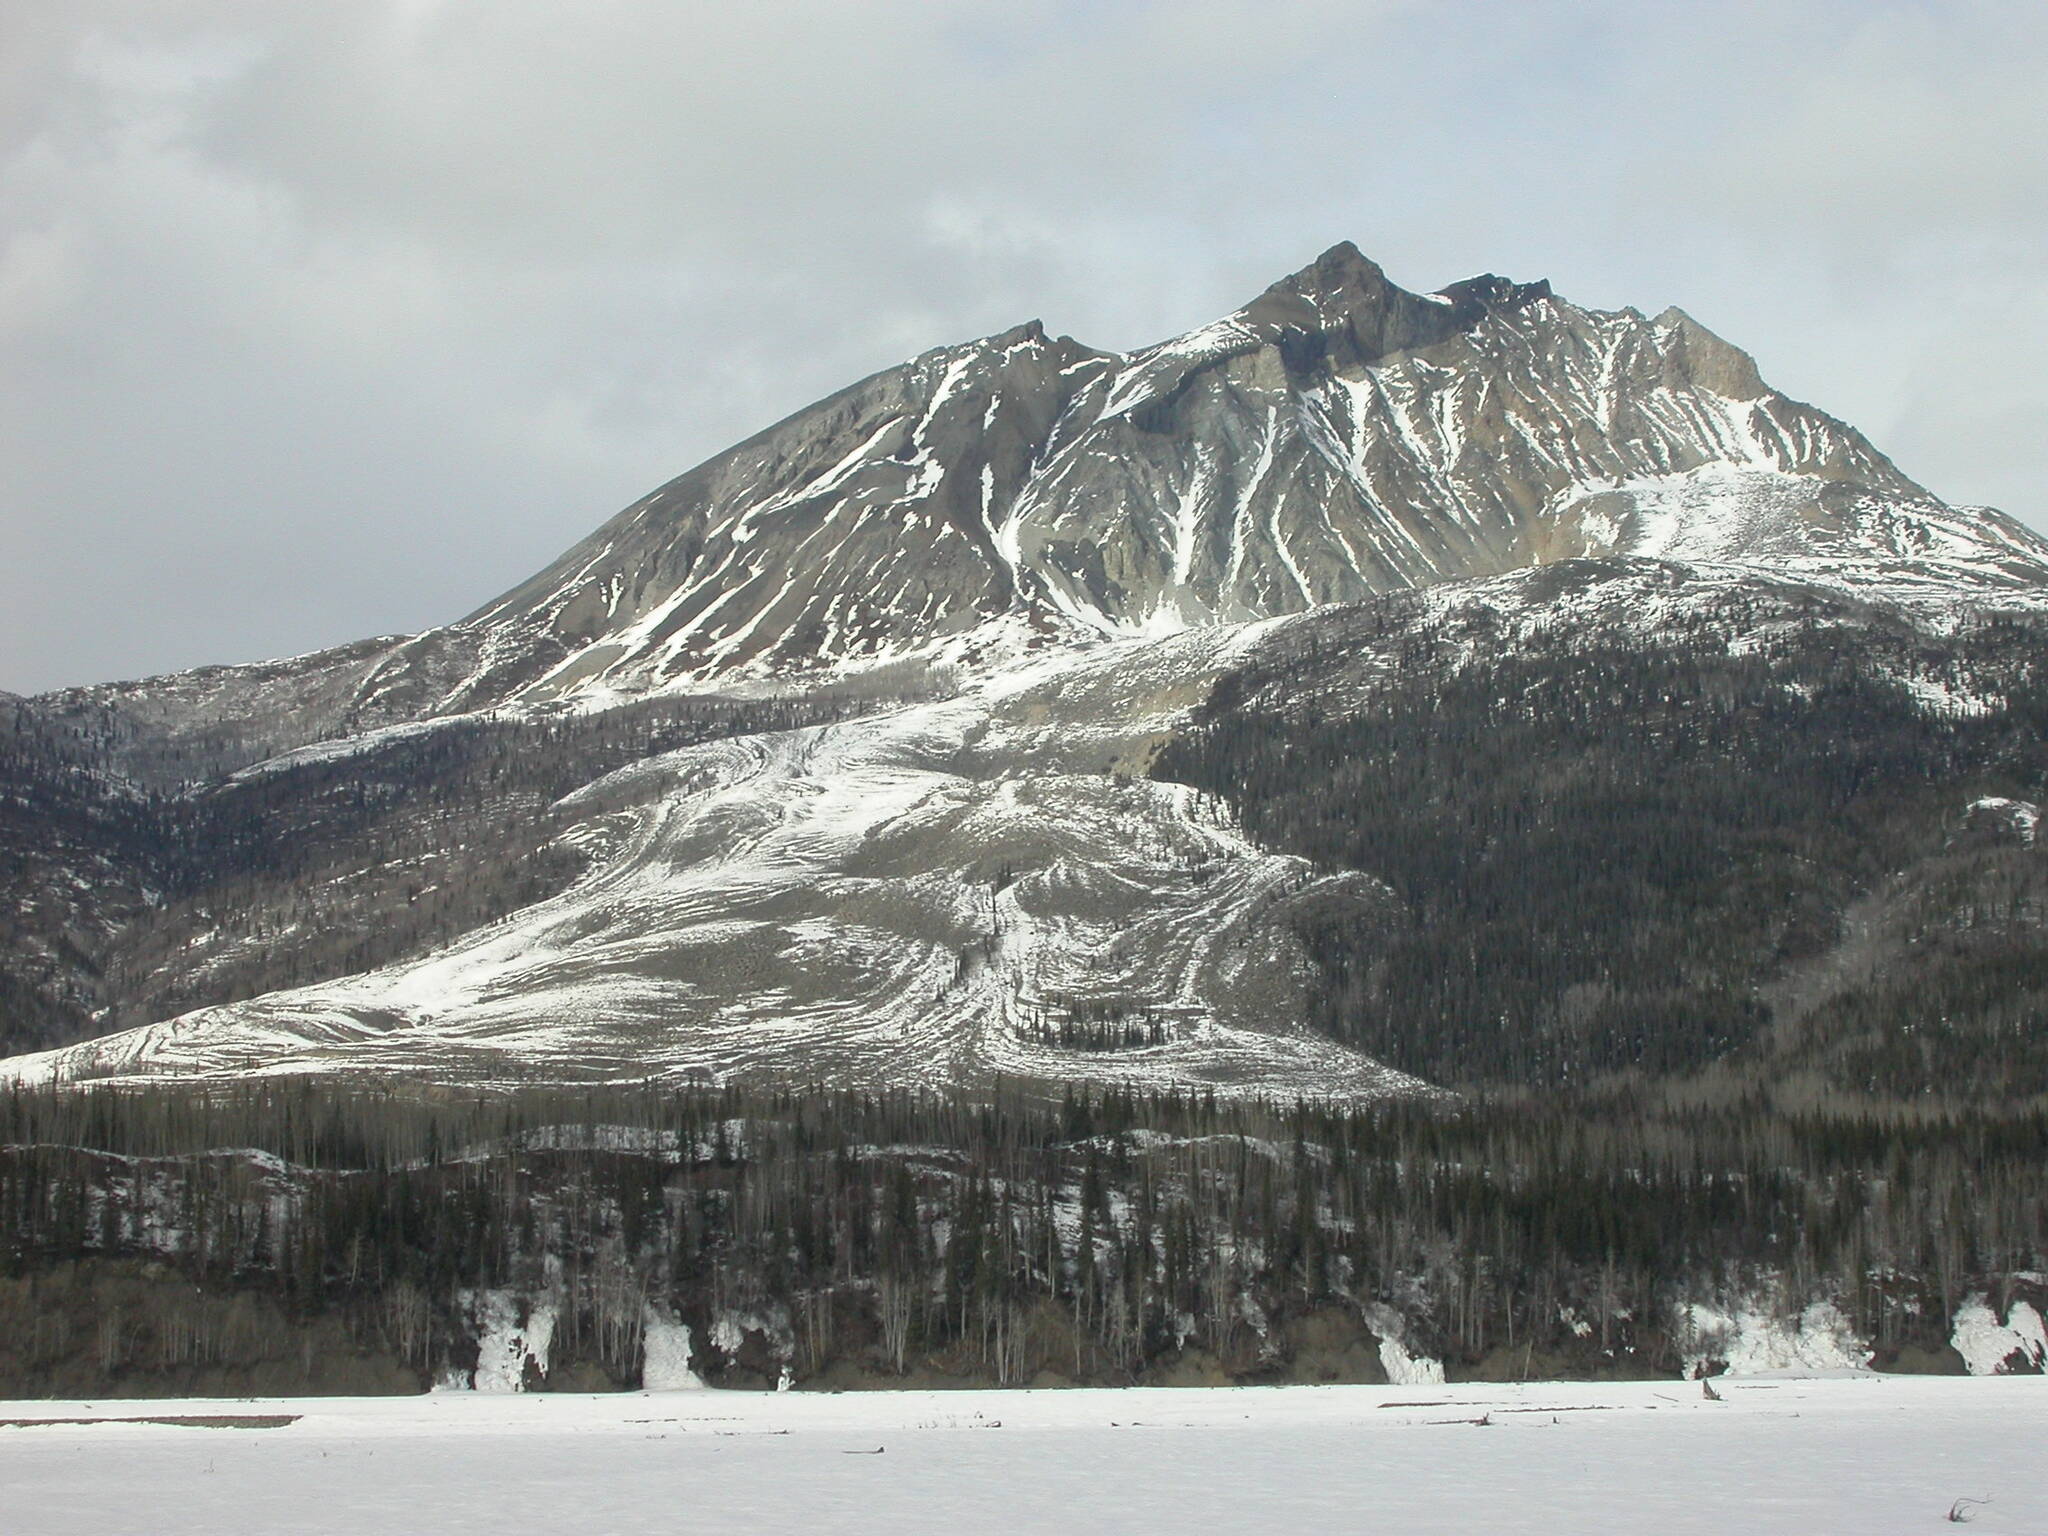 Sourdough rock glacier is one of several in the mountainous area near McCarthy, seen here in April of 2009. (Photo by Ned Rozell)